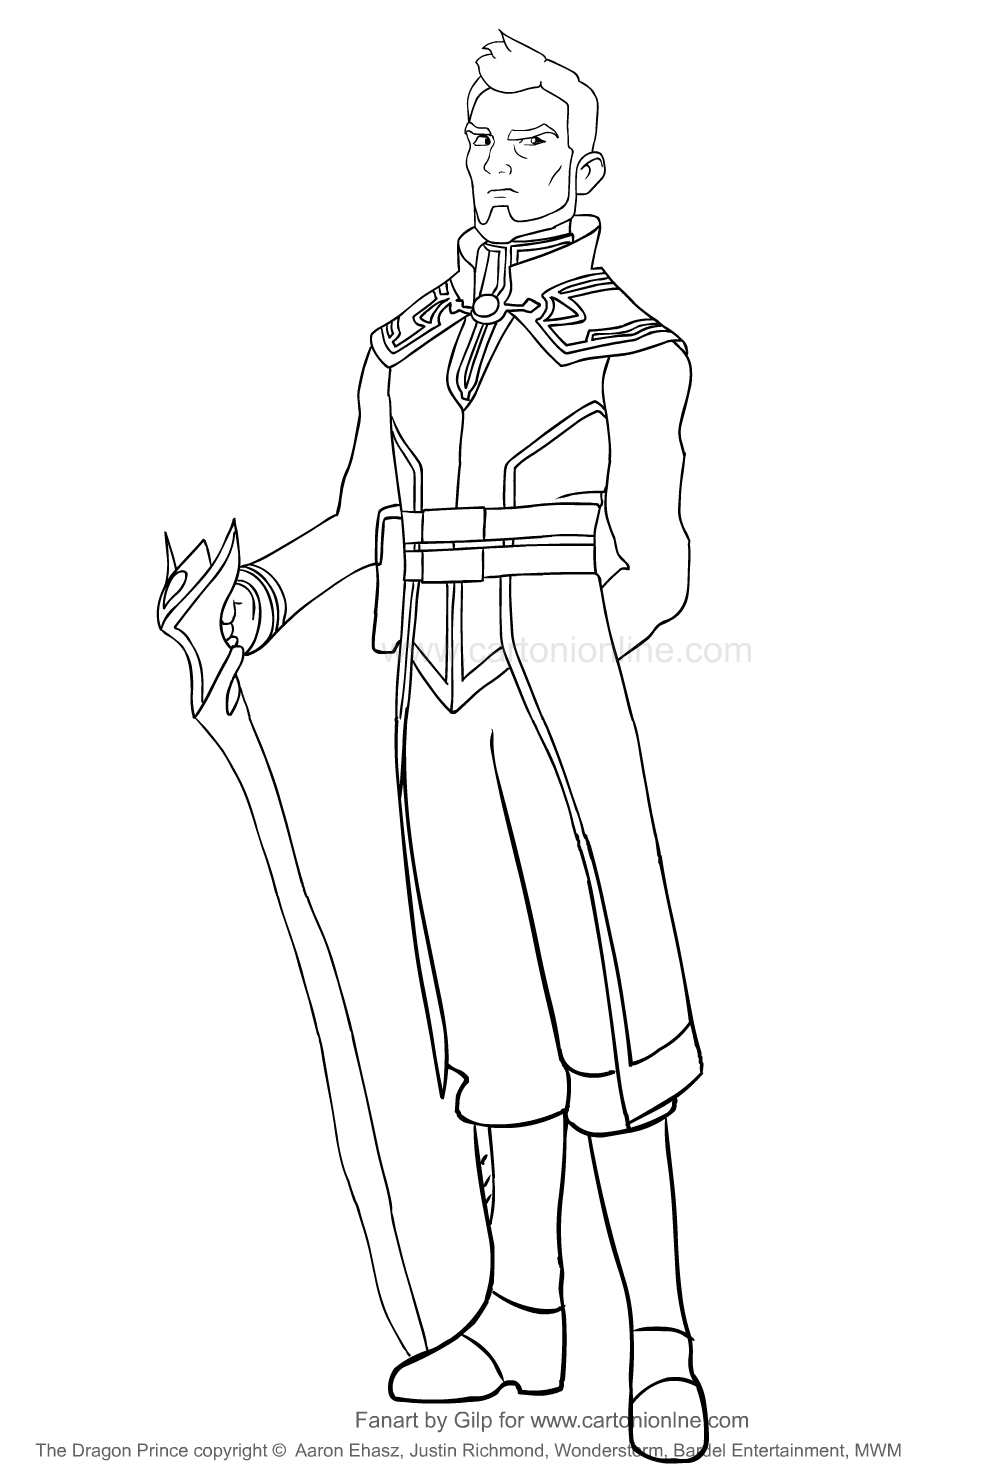 Viren from The Dragon Prince coloring page